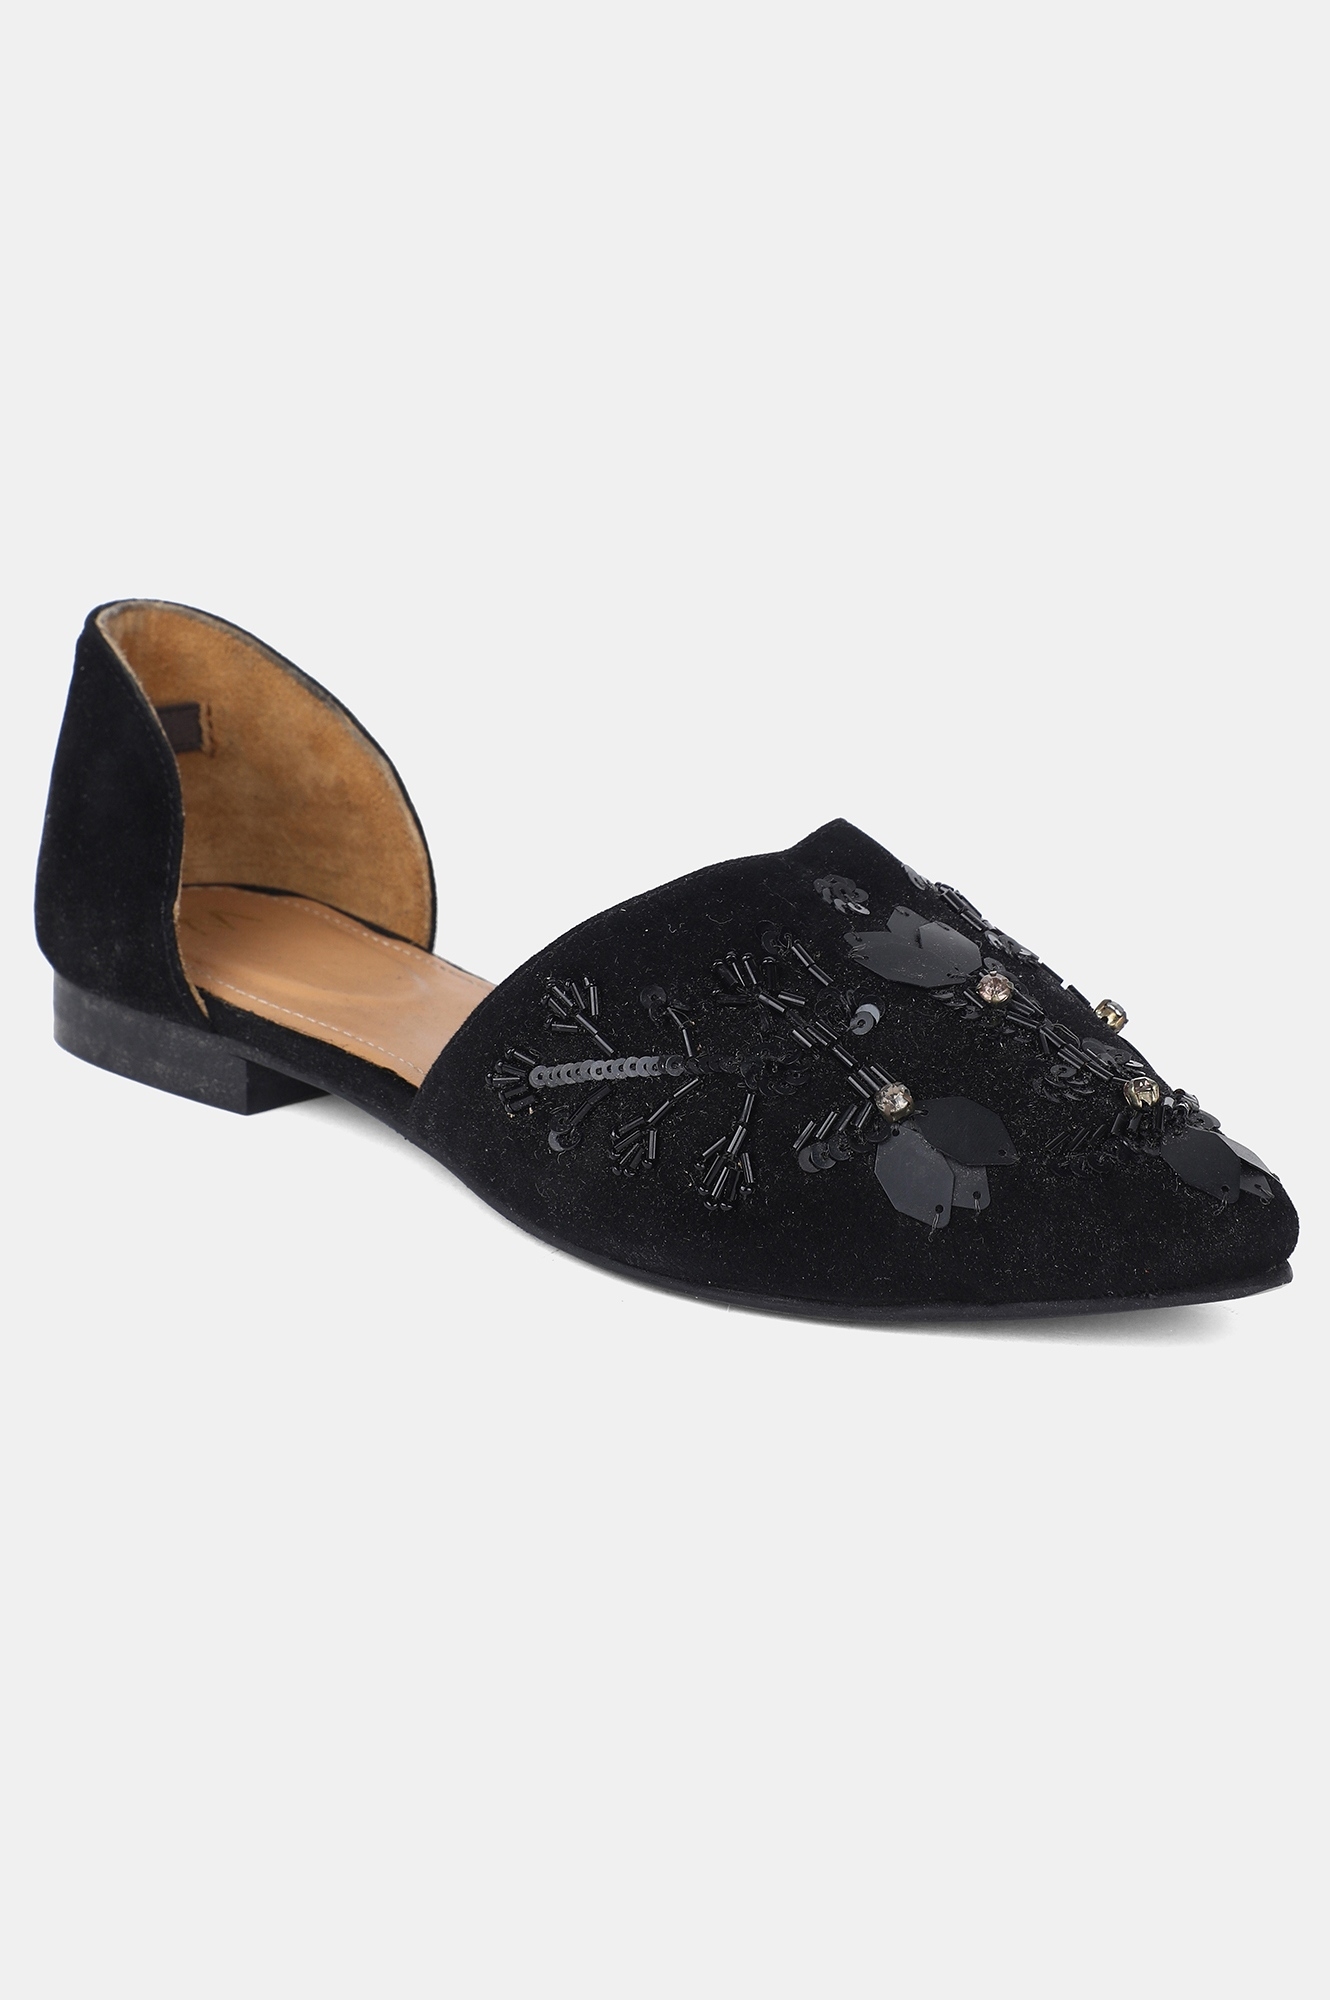 W | W Black Pointed Toe Embroidered Flat